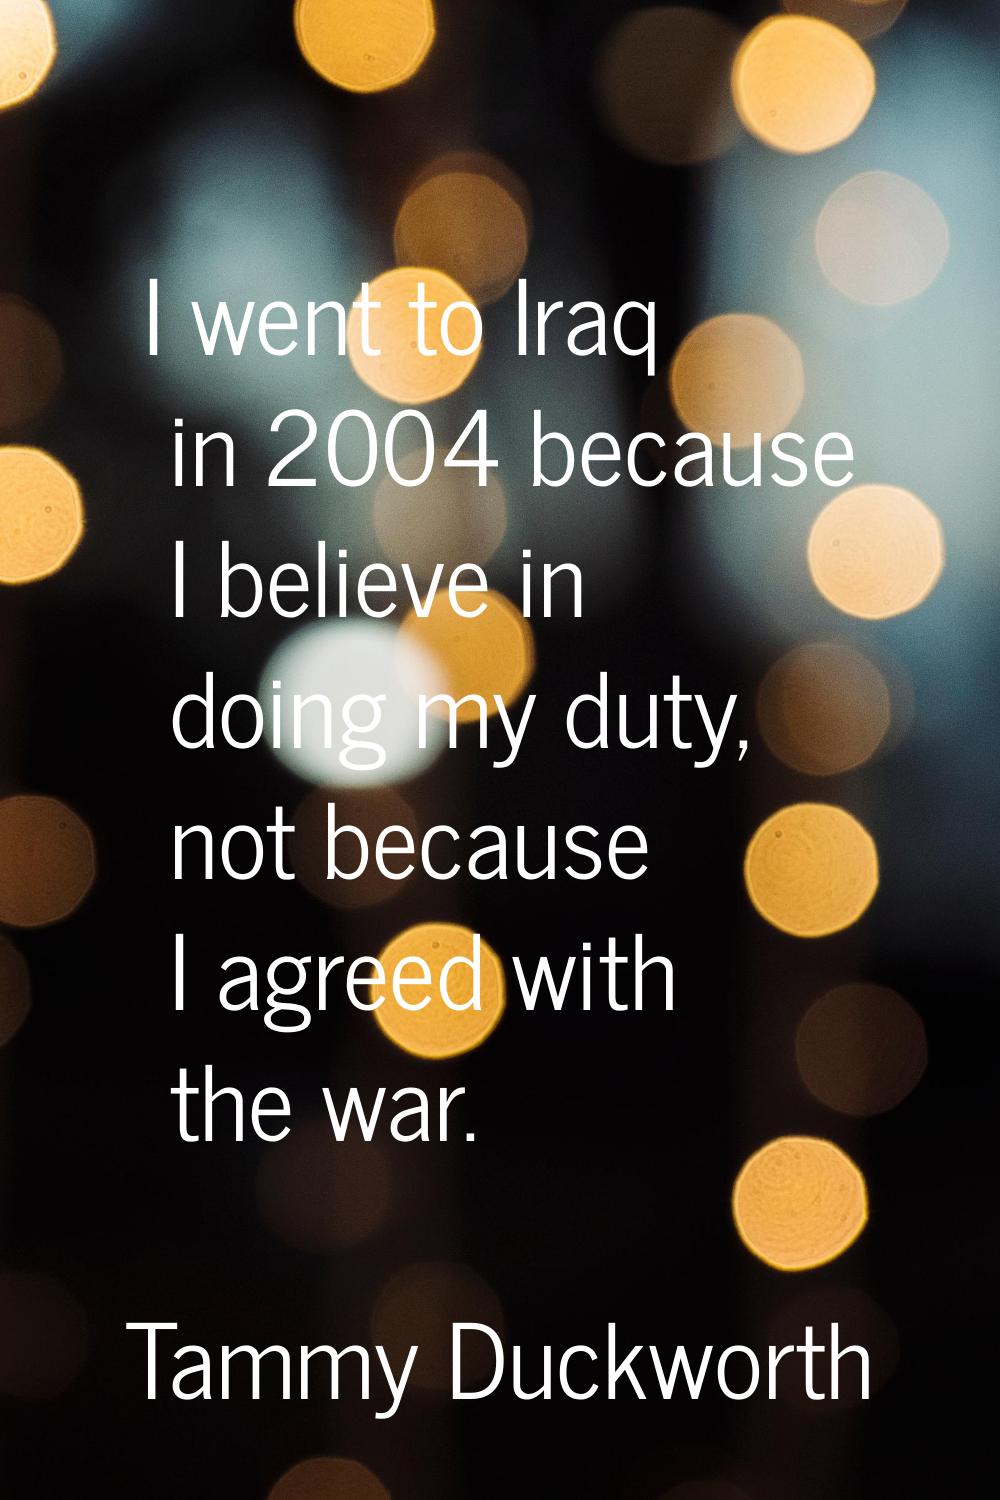 I went to Iraq in 2004 because I believe in doing my duty, not because I agreed with the war.